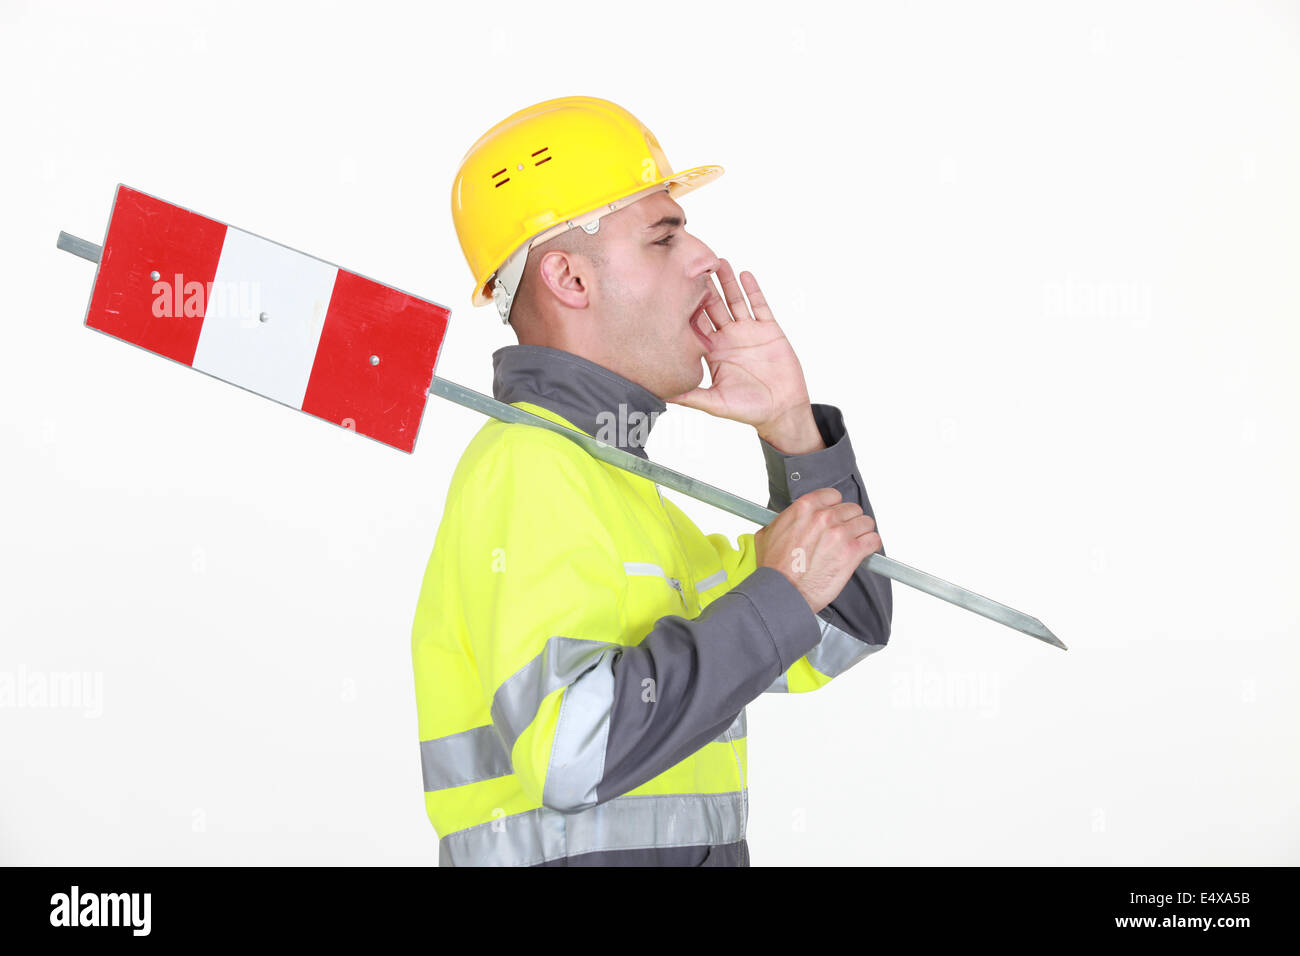 A road worker shouting instructions. Stock Photo